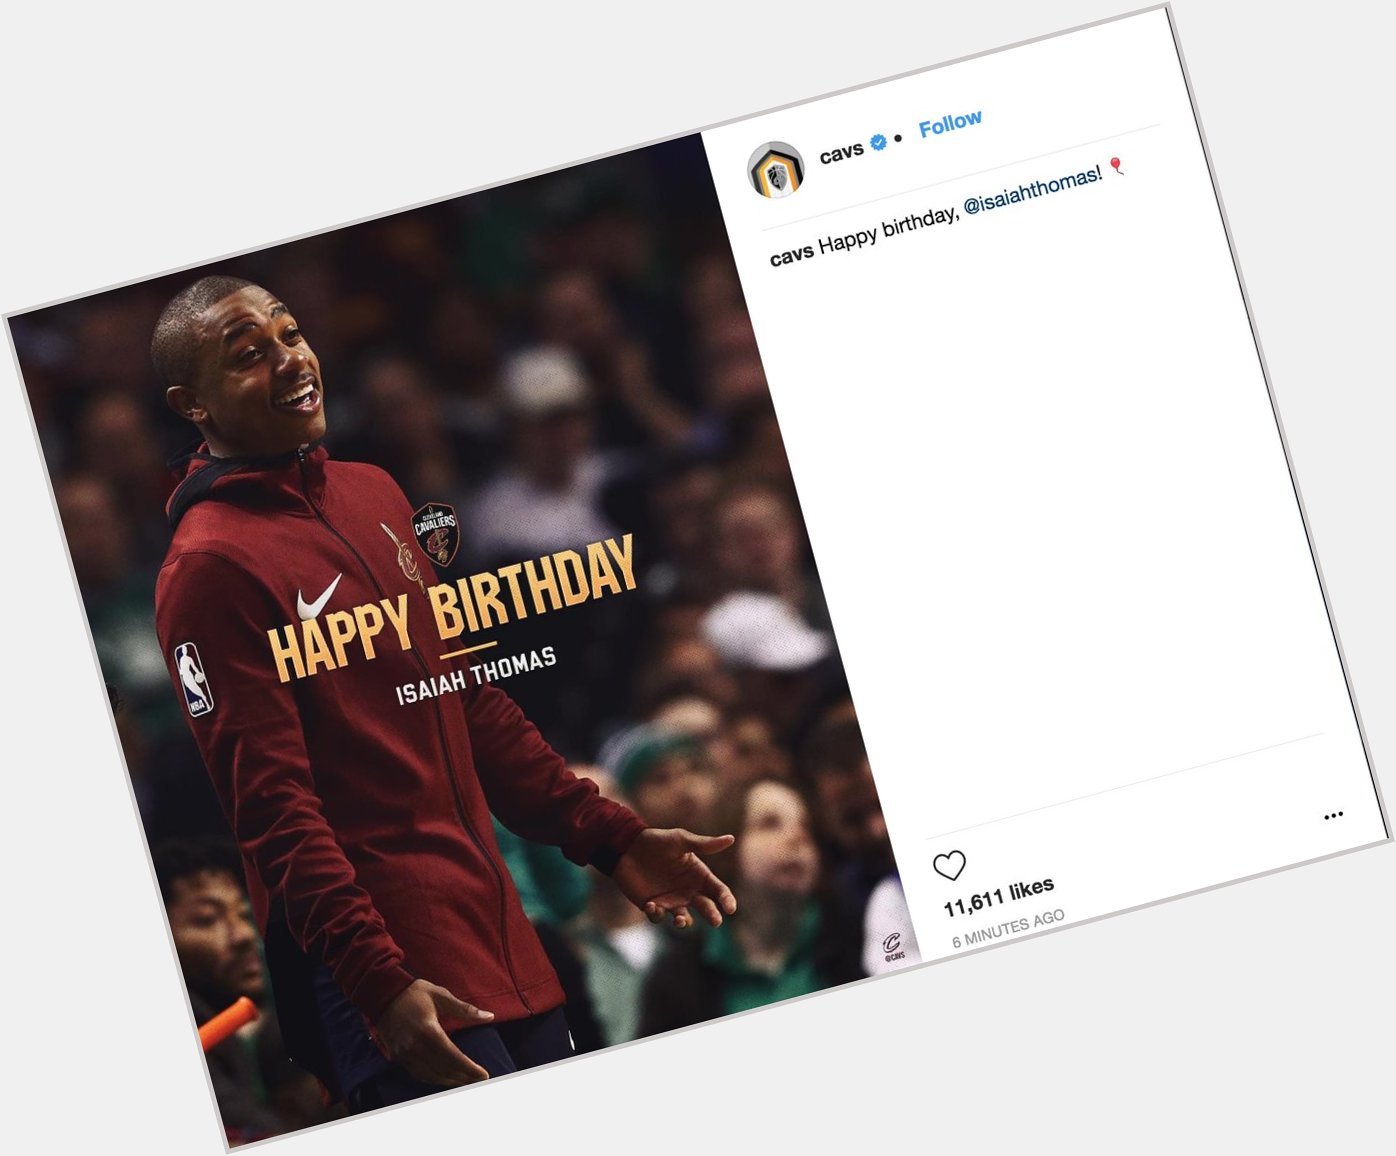 The Cavs wished Isaiah Thomas a happy birthday on Instagram, but disabled the comments 